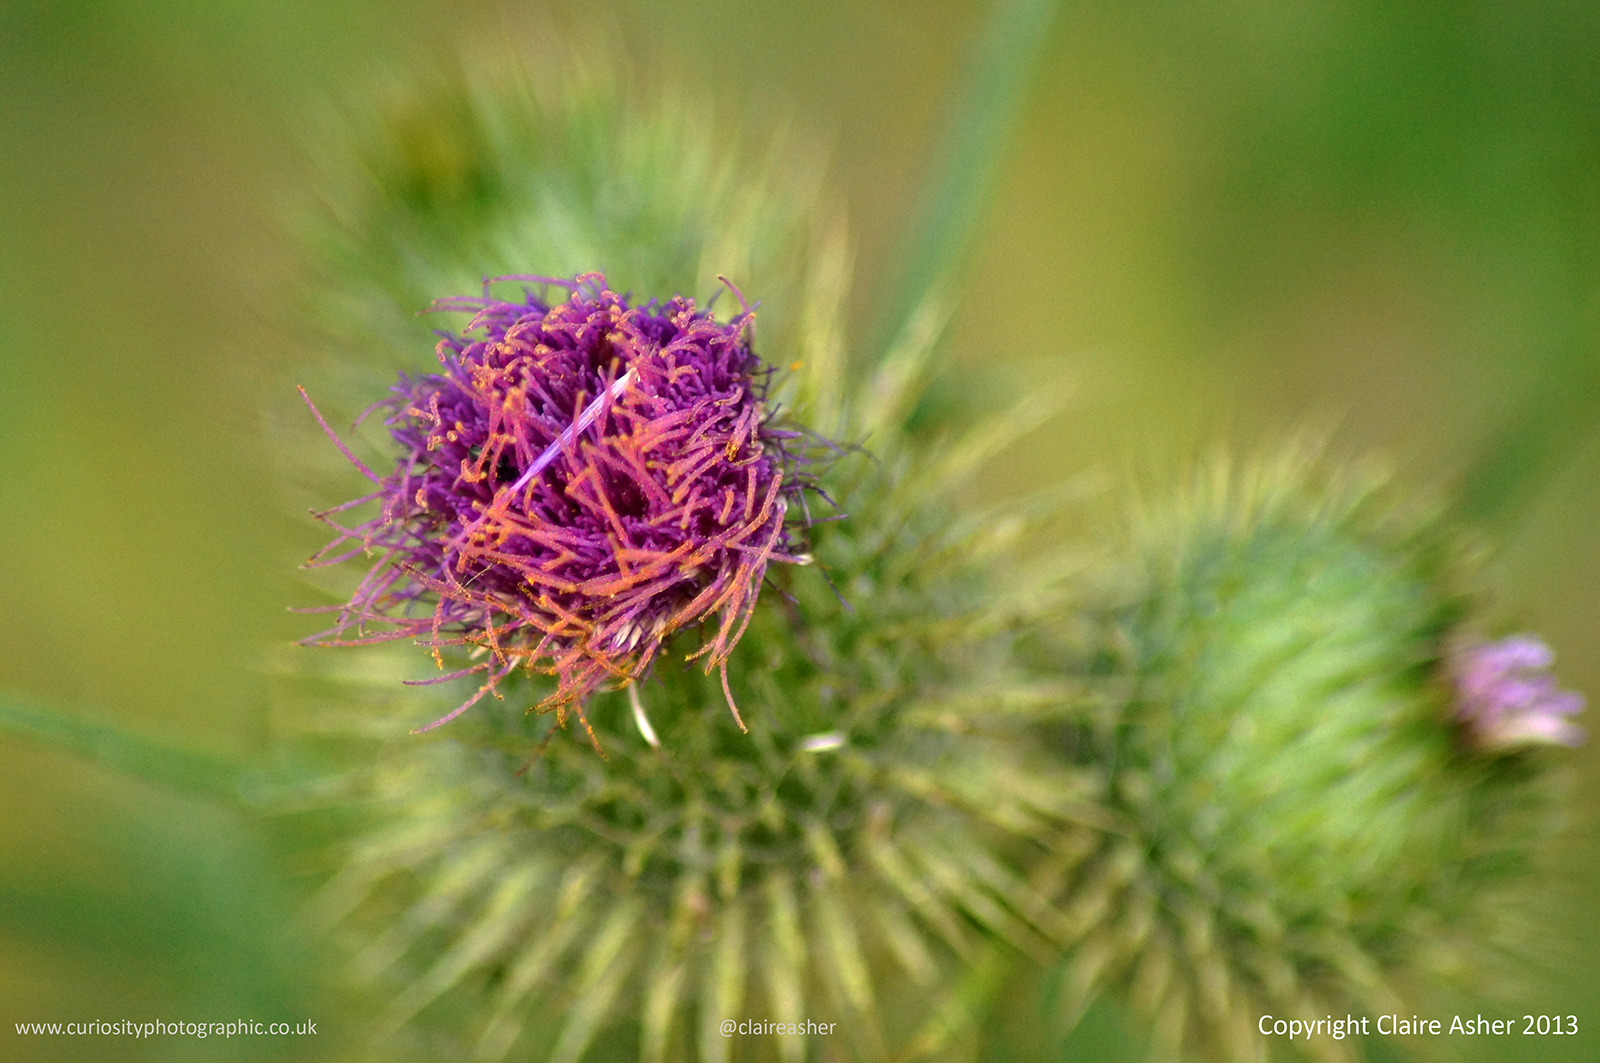 A thistle, photographed in Hertfordshire in 2013.